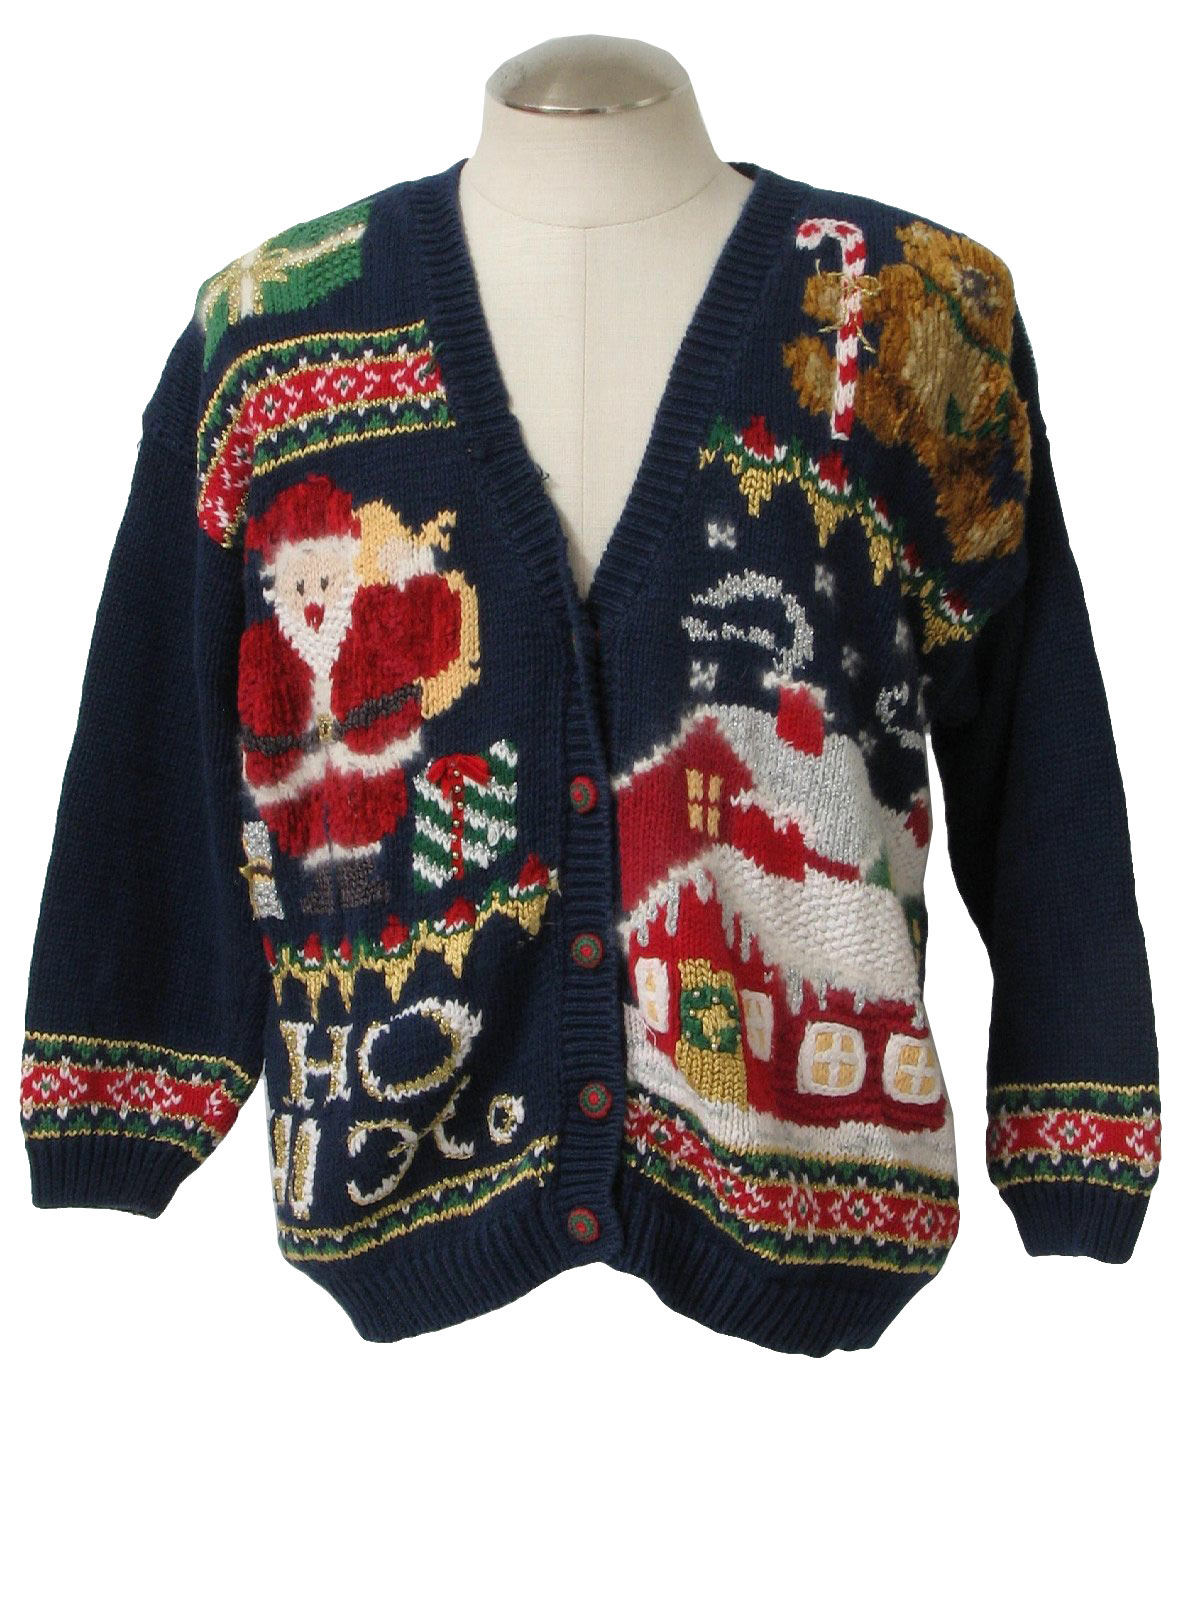 Ugly Christmas Cardigan Sweater: -Maggie Lawrence- Unisex navy blue ...